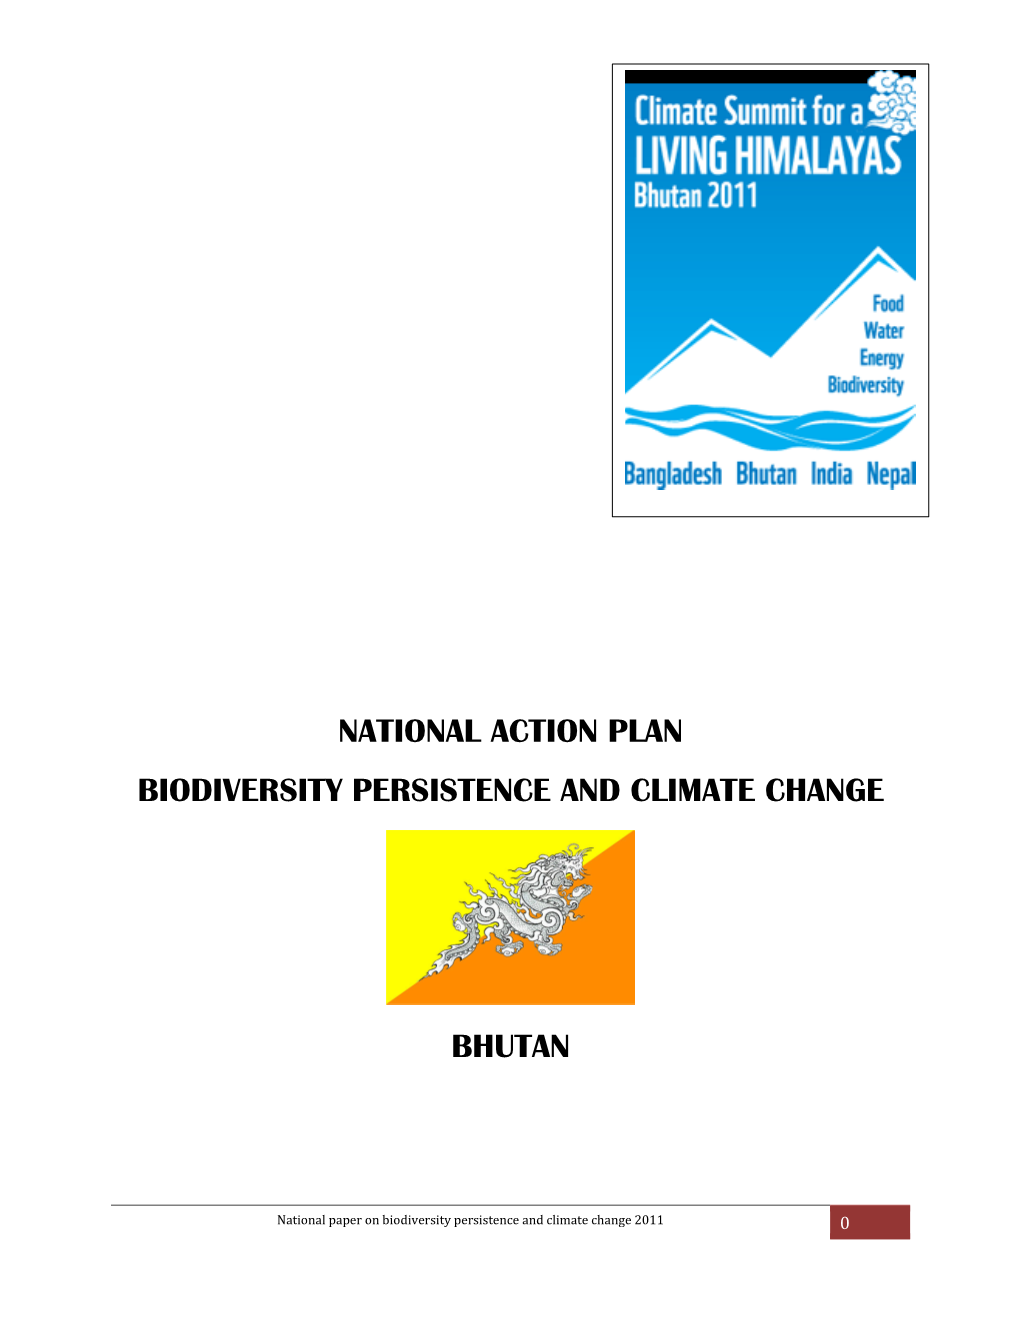 National Action Plan Biodiversity Persistence and Climate Change